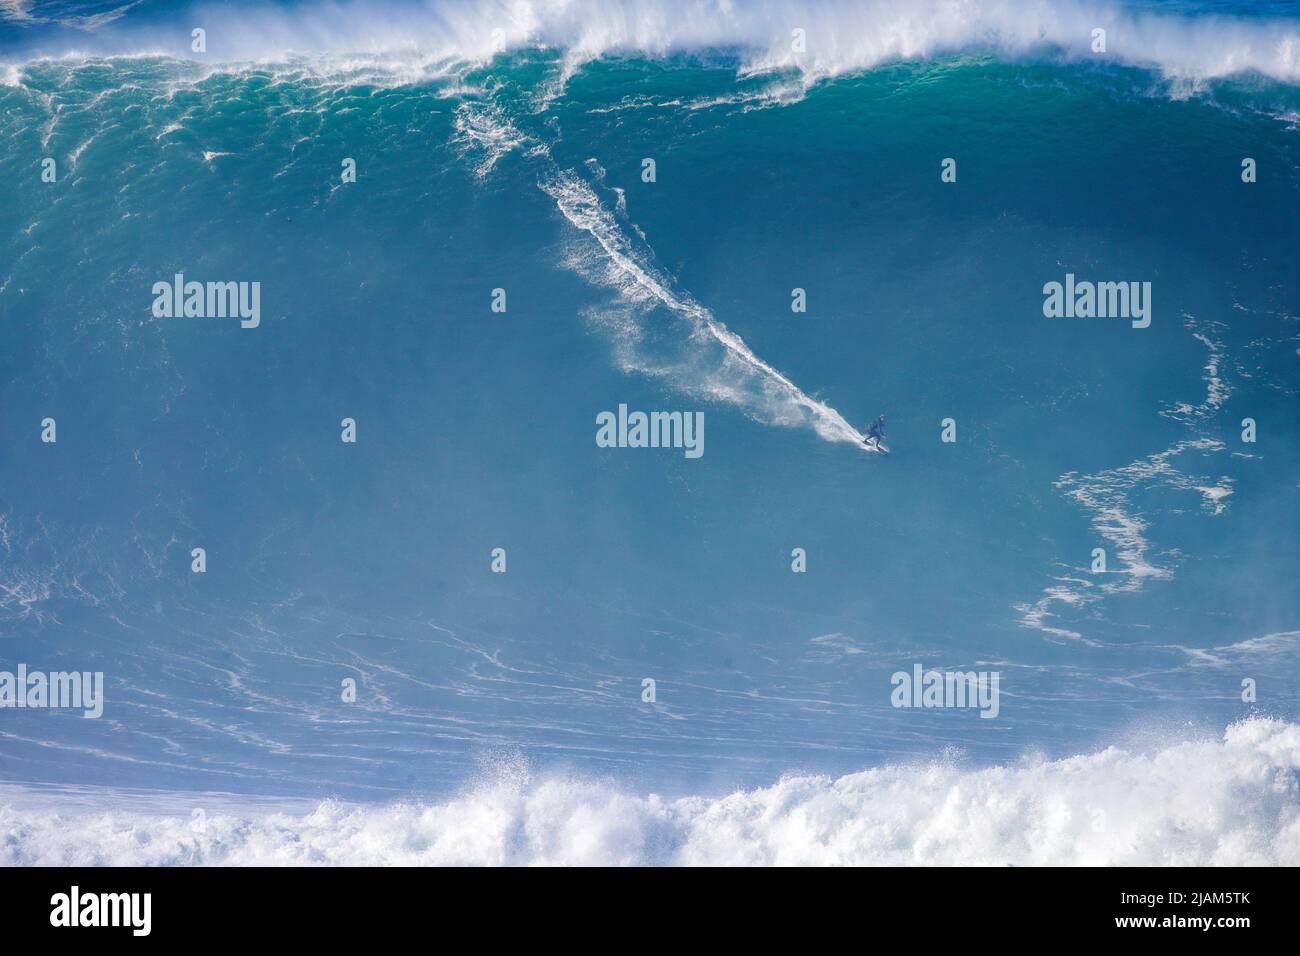 A new world record title has been officially recognized and awarded on May 25, 2022 to the German big wave surfer Sebastian Steudtner, who became the Stock Photo